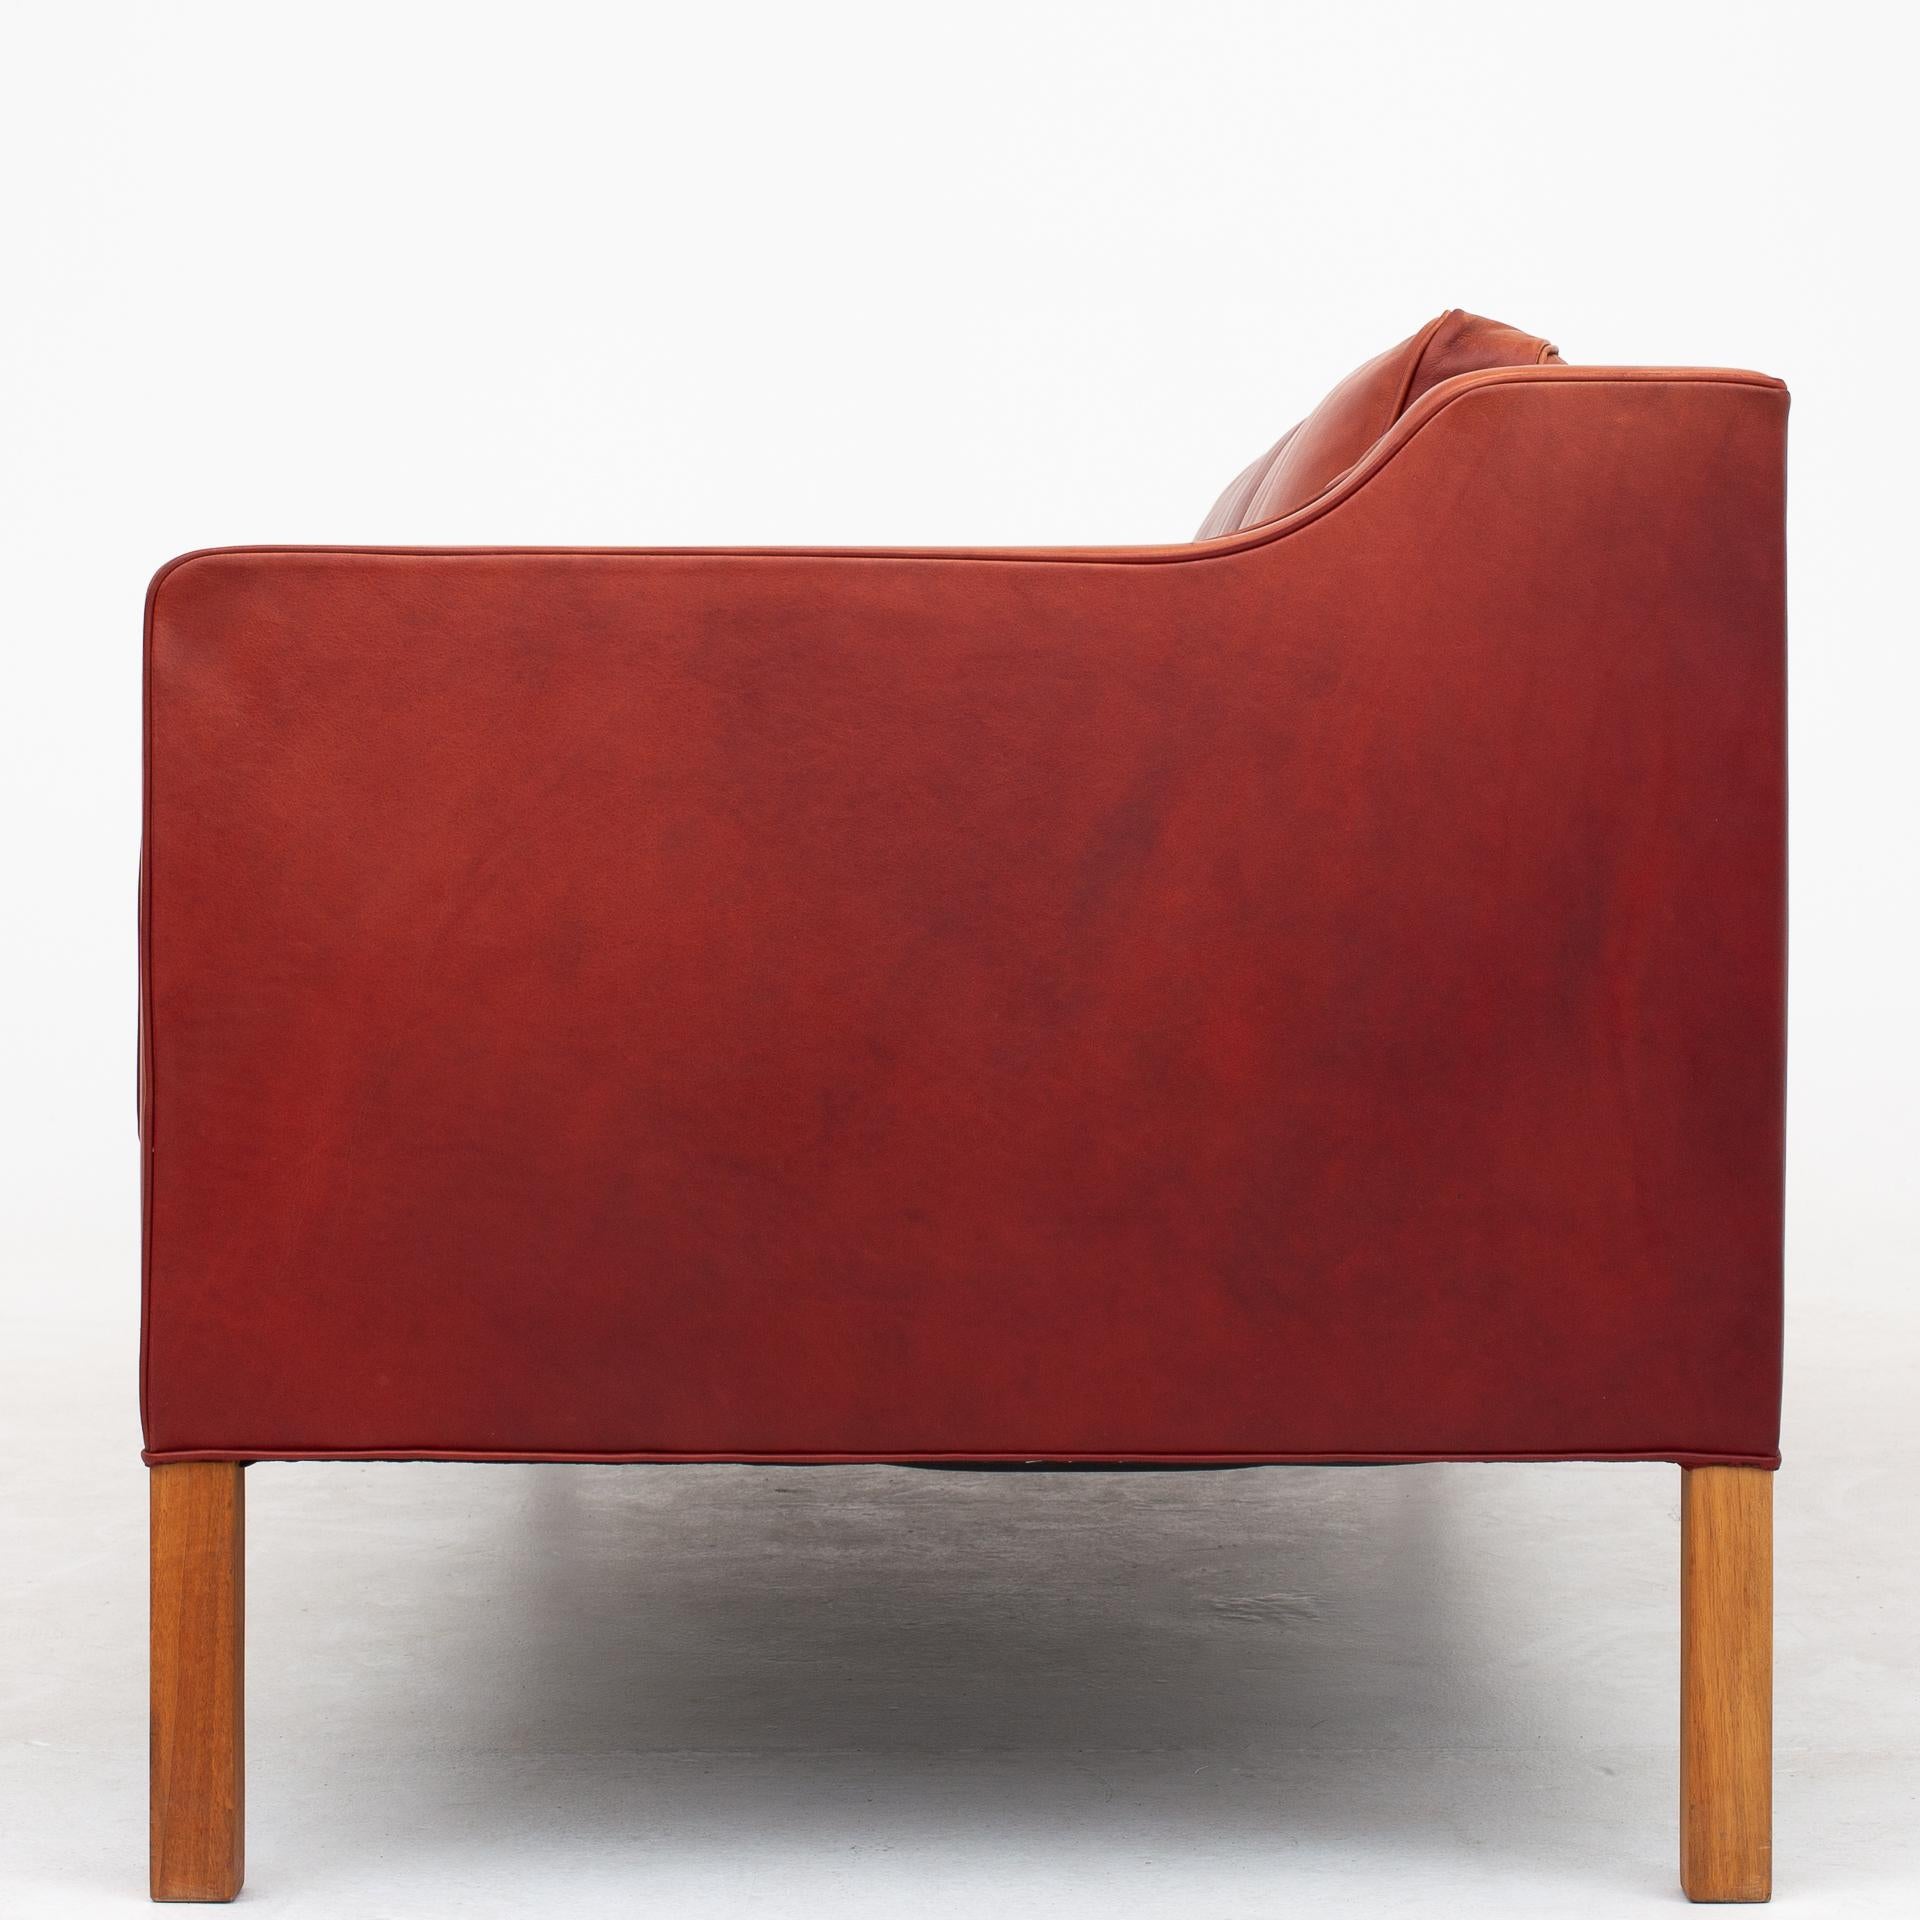 BM 2213, 3-seat sofa in original, patinated leather with legs of teak. Maker Fredericia Furniture.